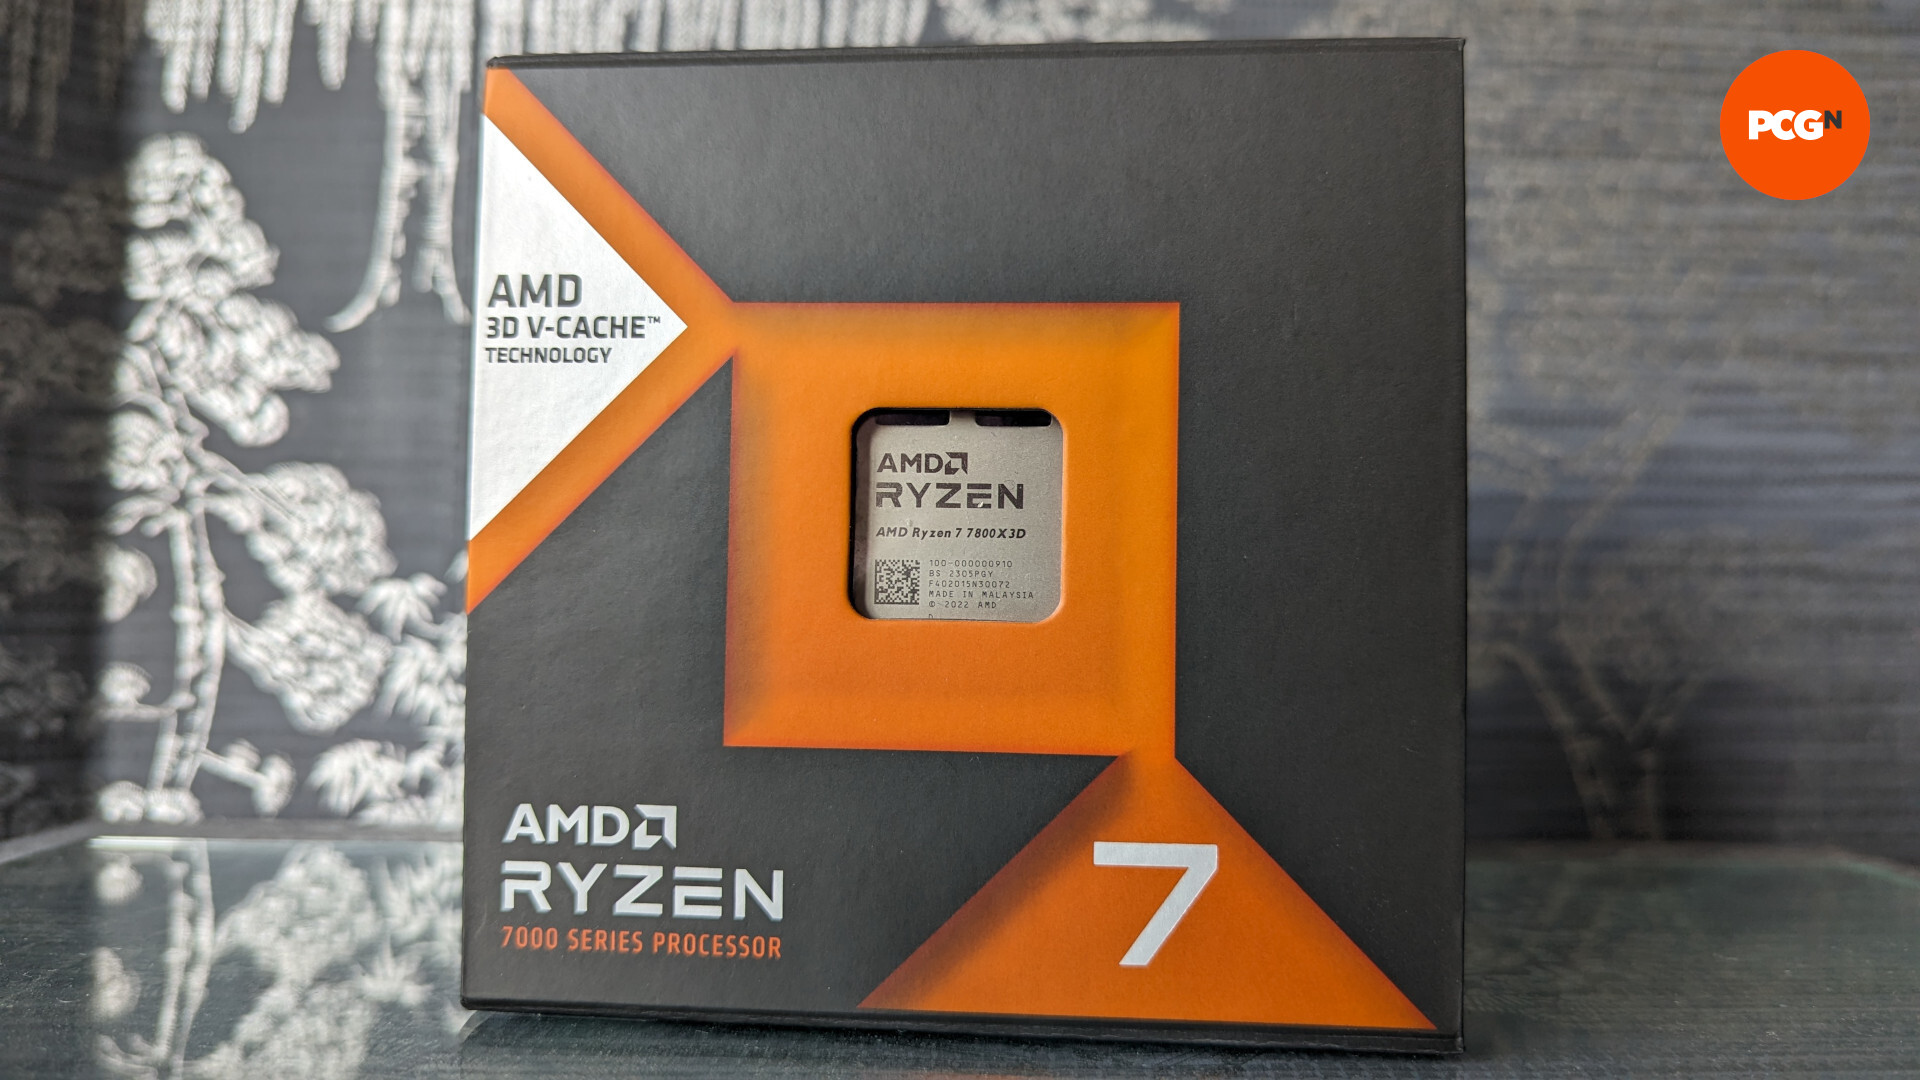 AMD Ryzen 7 7800X3D review: The CPU is inside its box